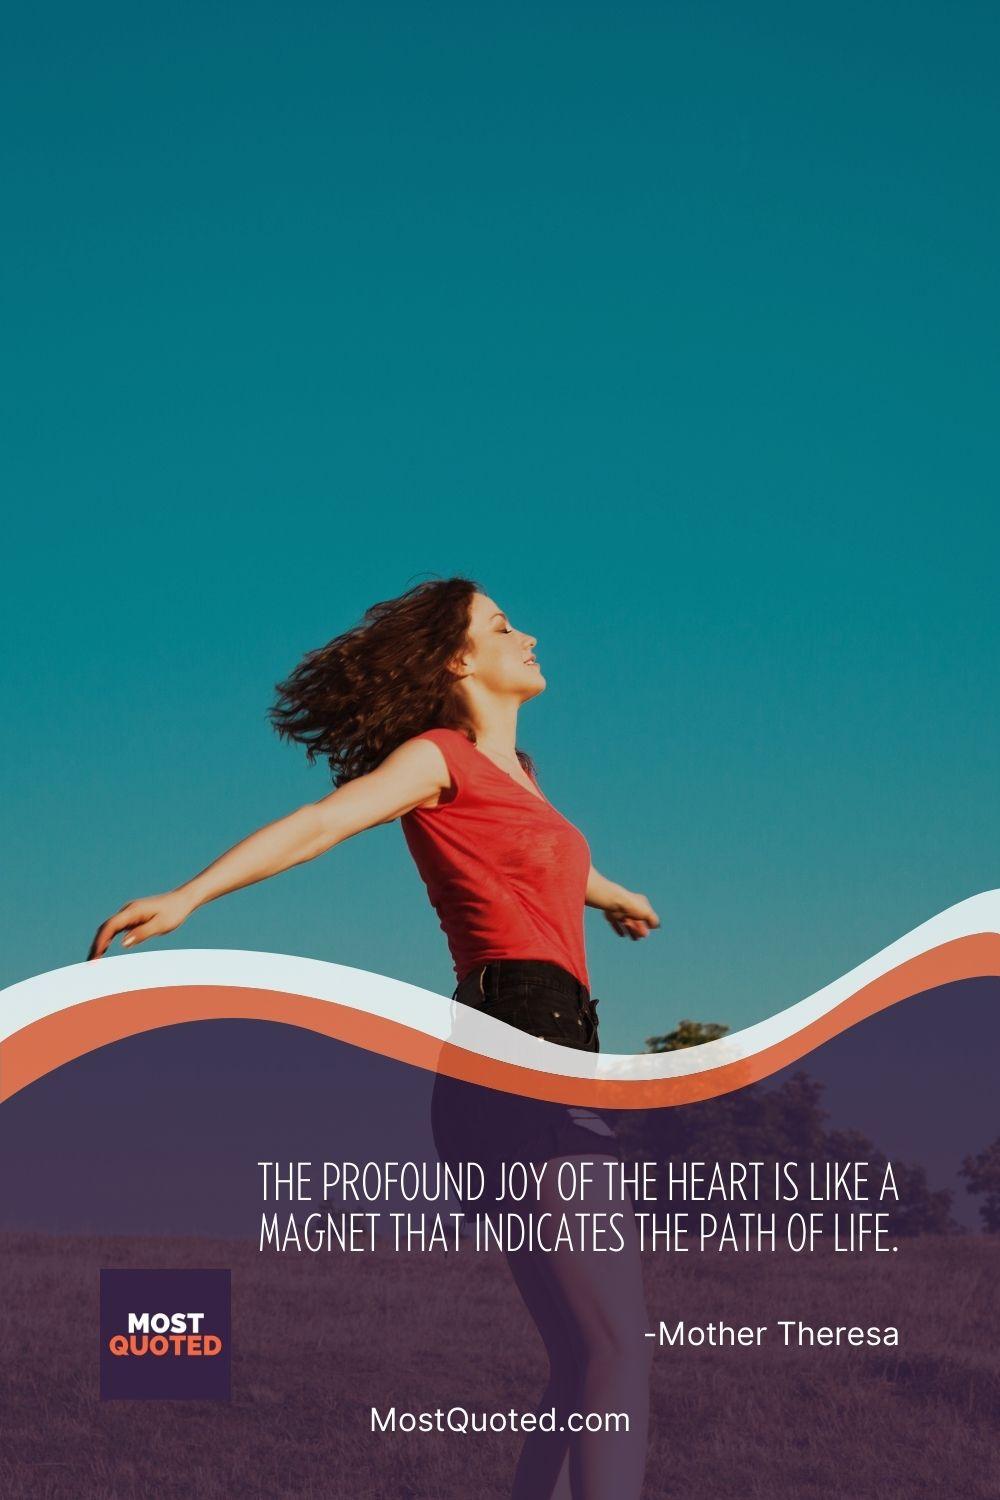 The profound joy of the heart is like a magnet that indicates the path of life. - Mother Teresa